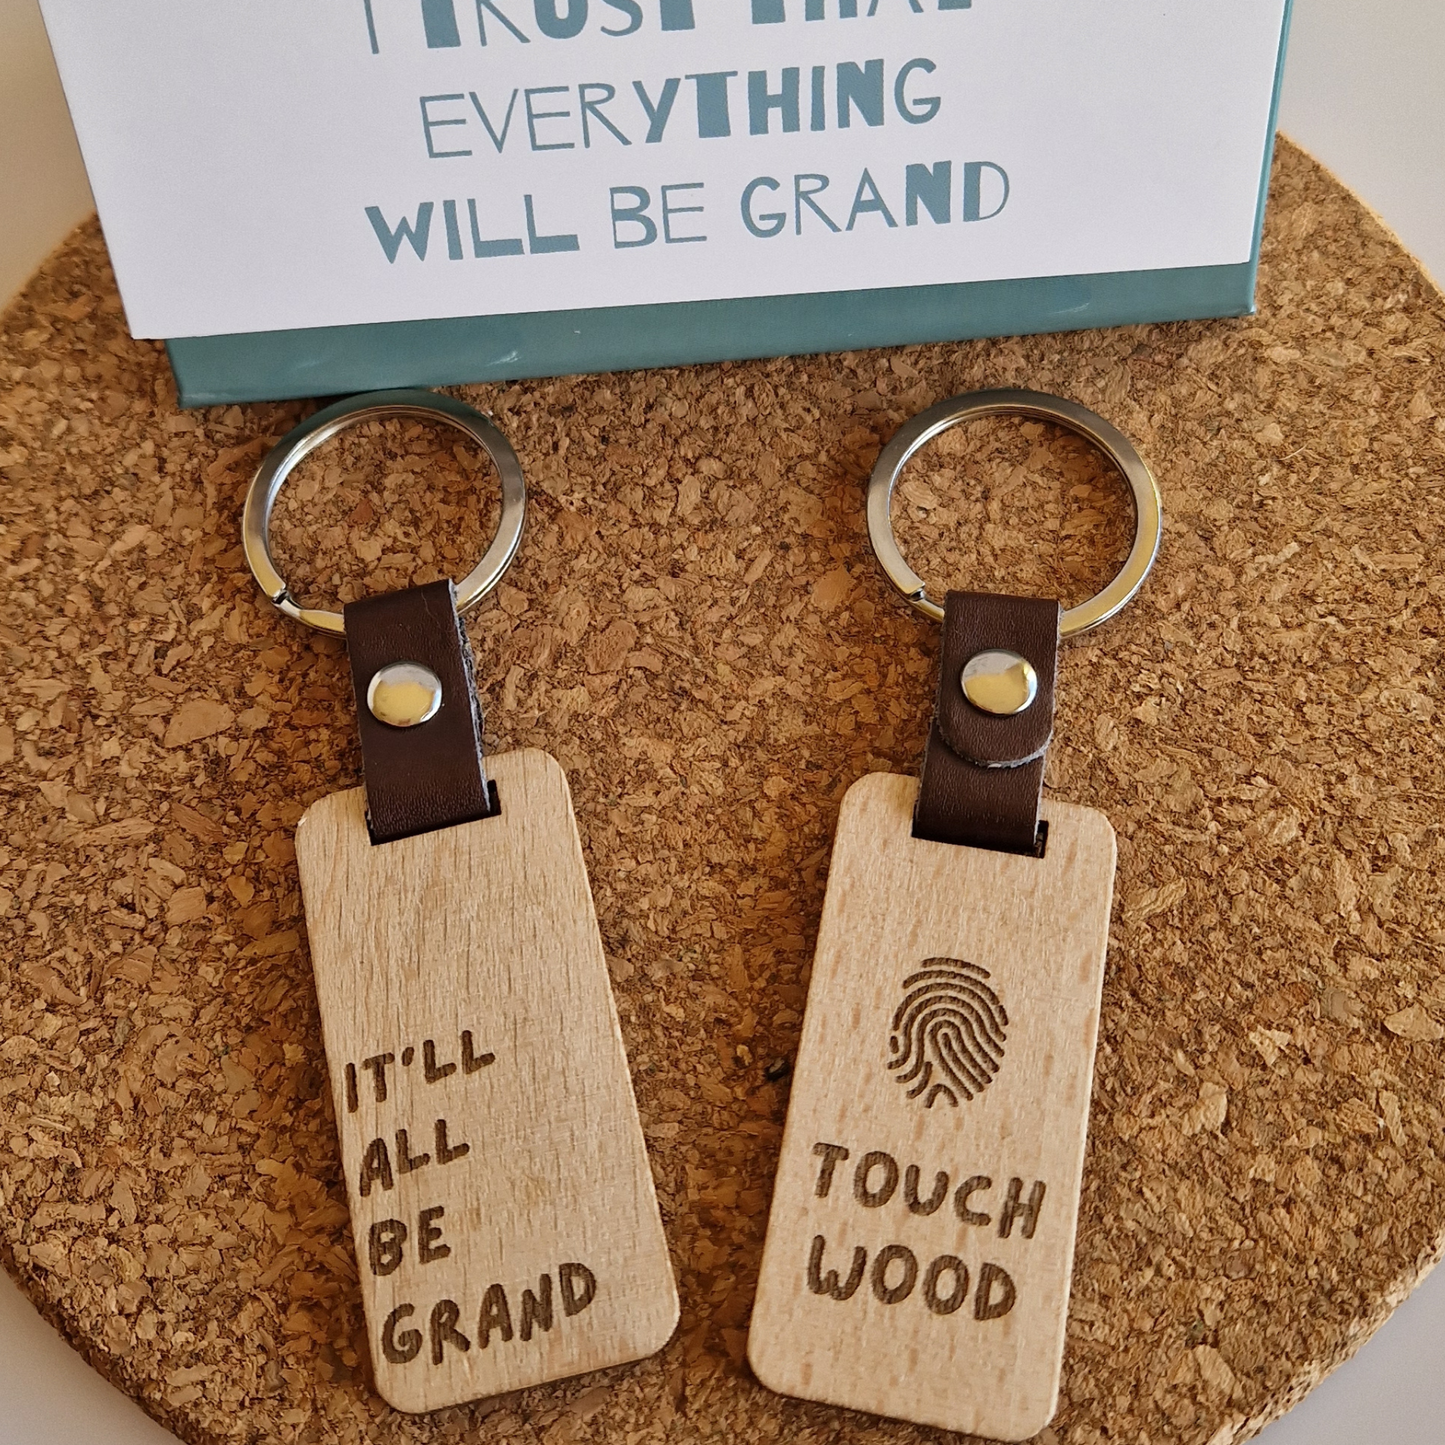 IT'LL ALL BE GRAND- TOUCH WOOD KEYRING